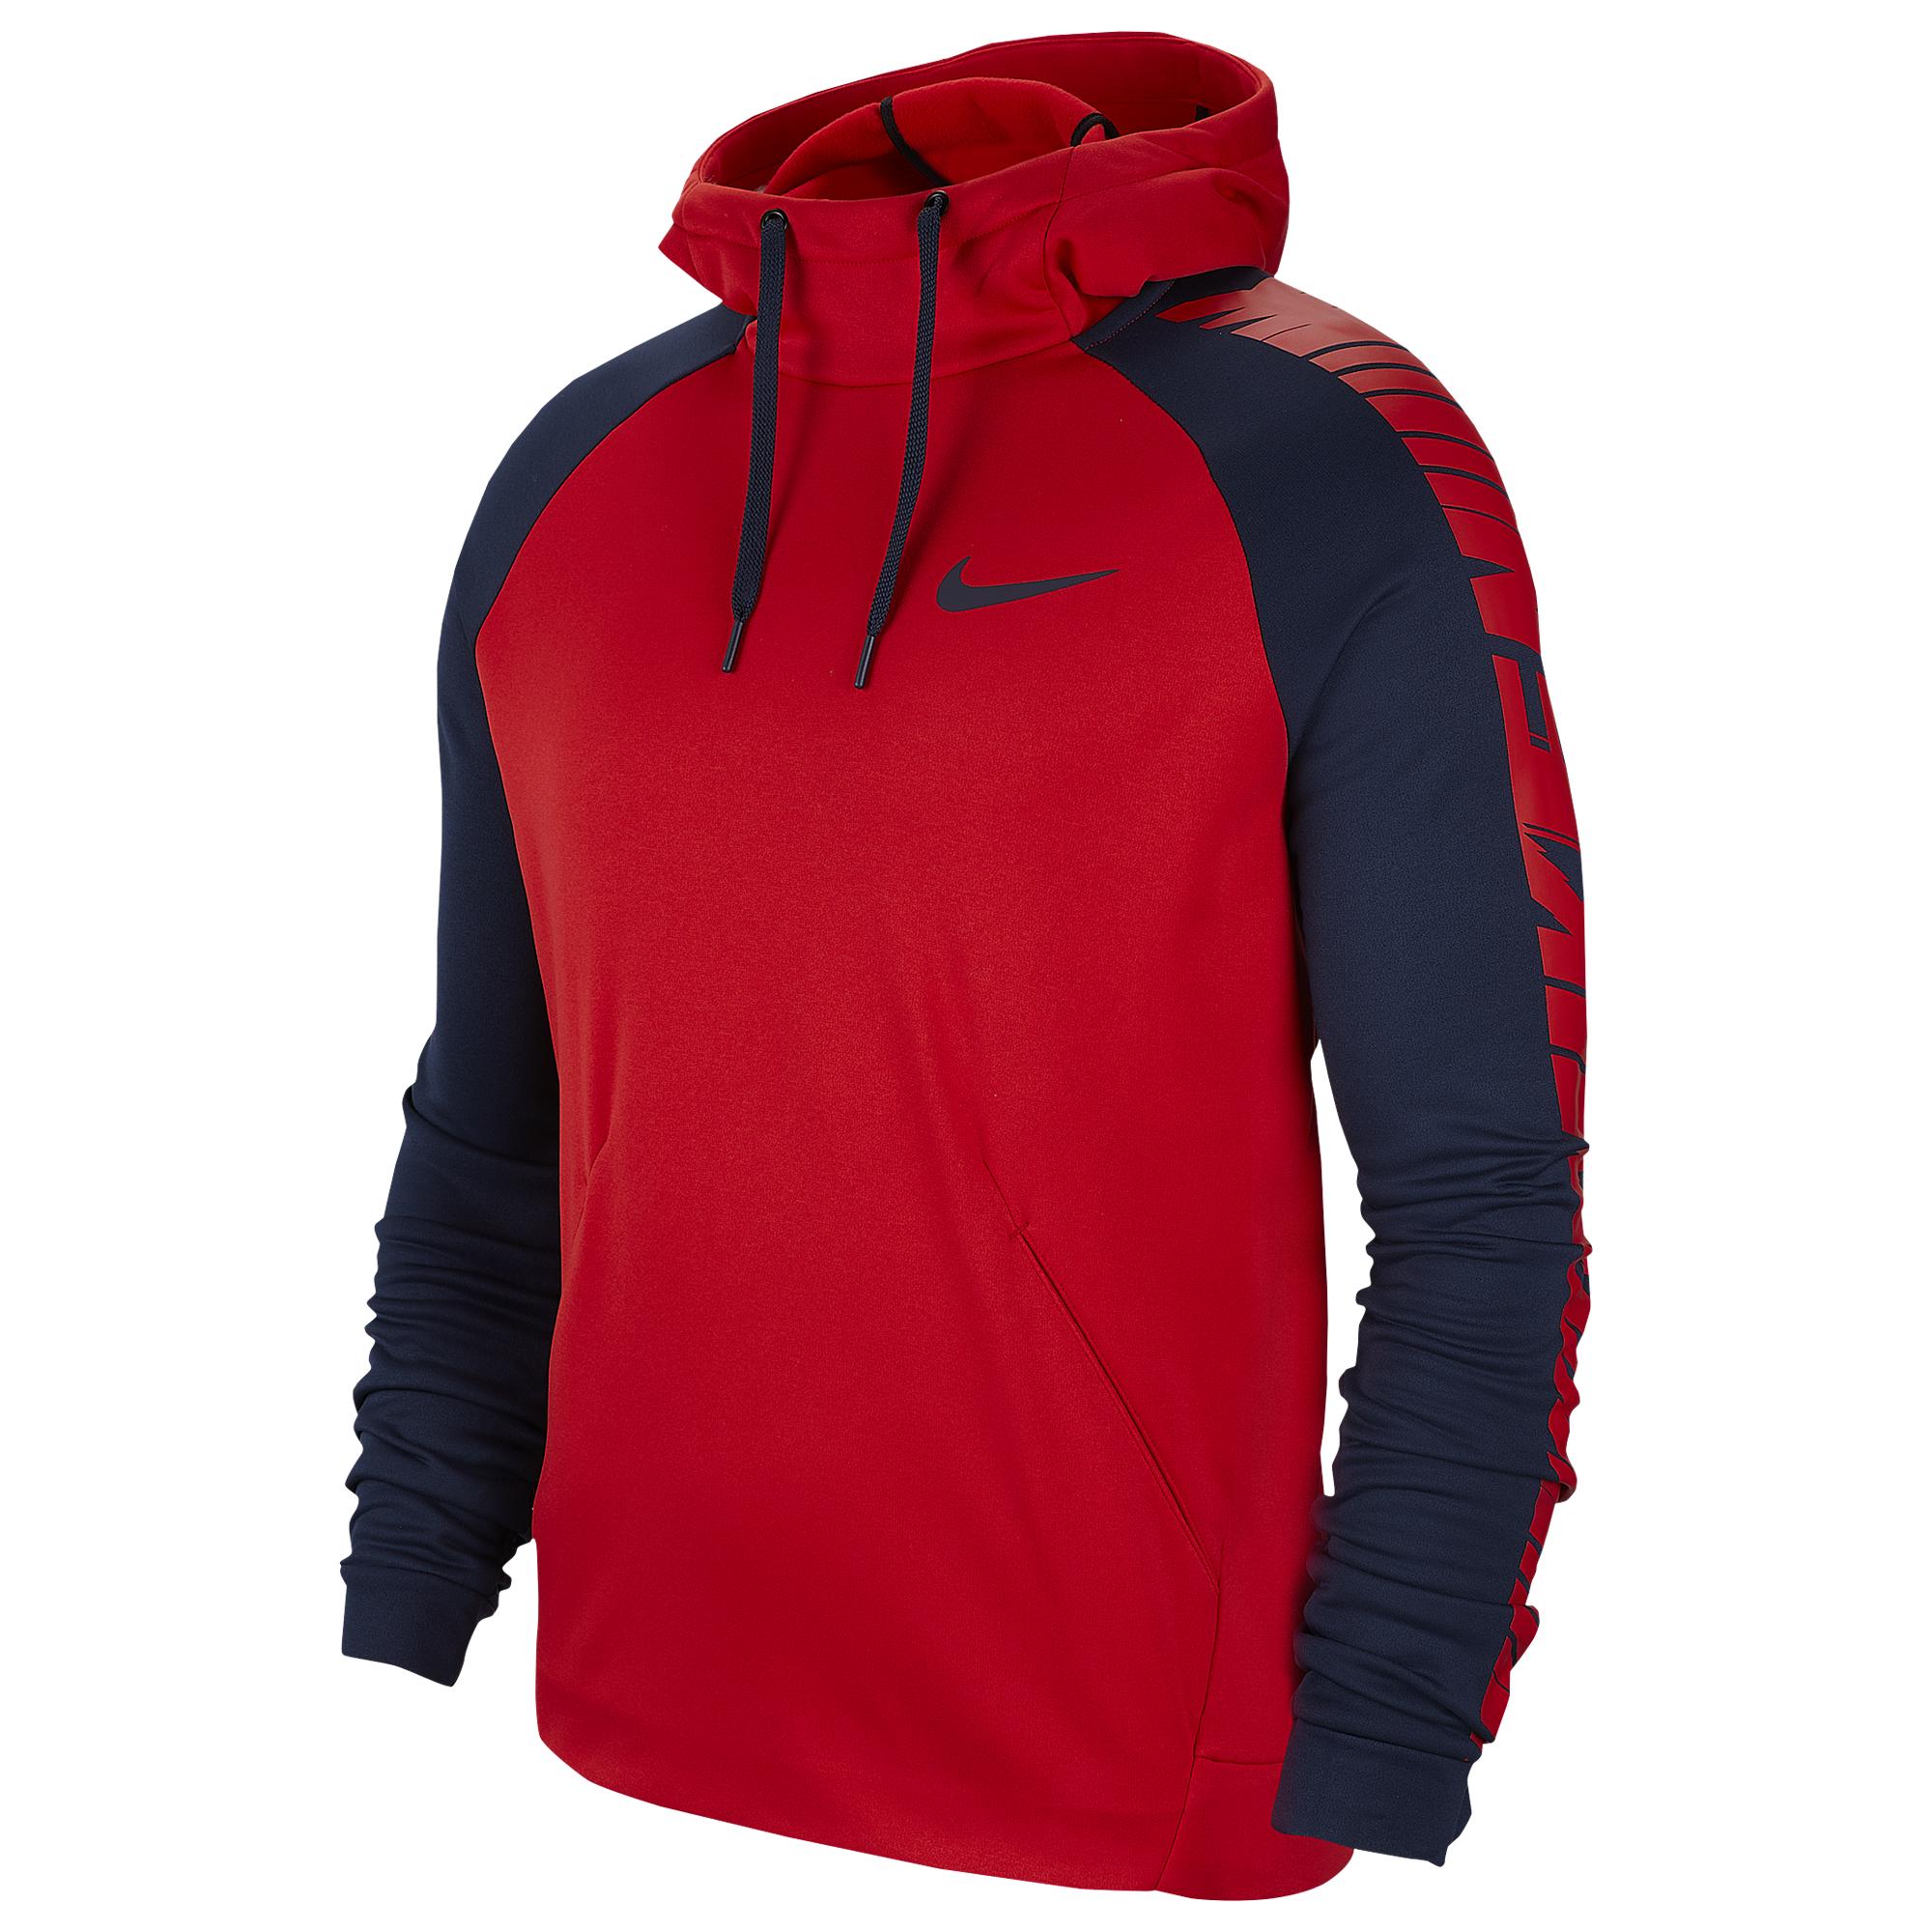 Nike Therma Fleece Sleeve Graphic Hoodie in Red for Men - Lyst